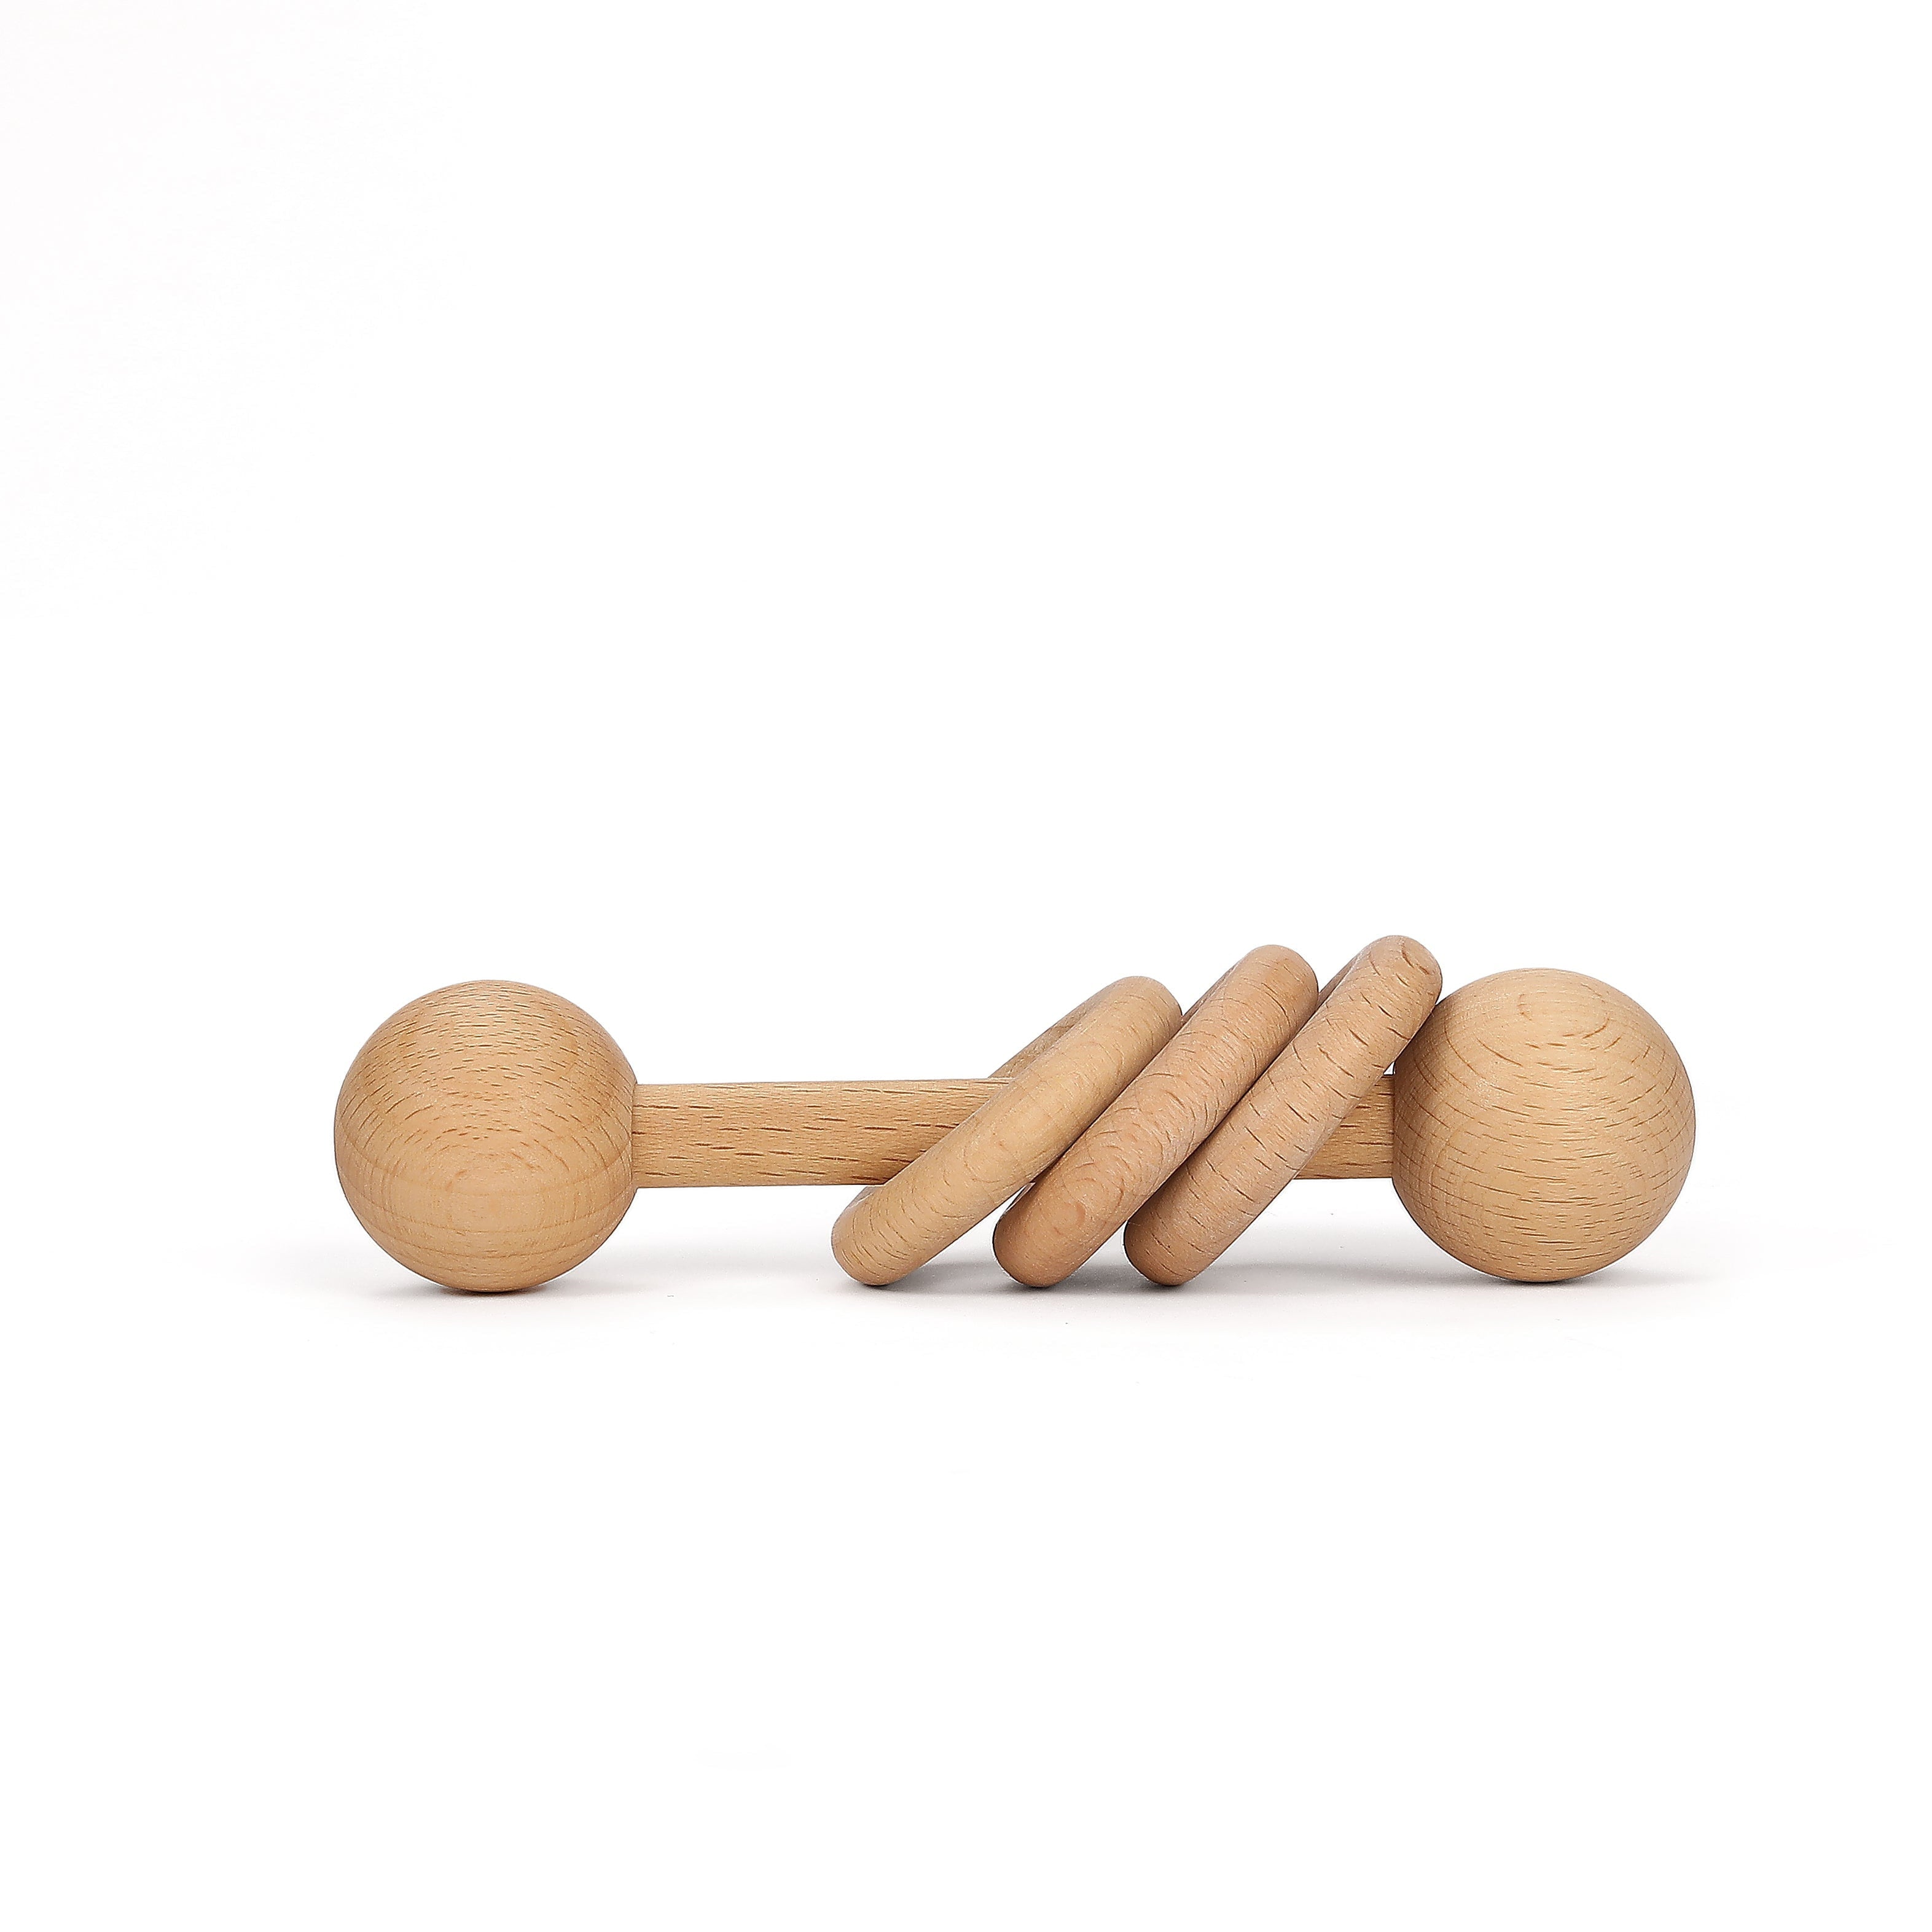 Baby rattle made of beech wood with 3 rings